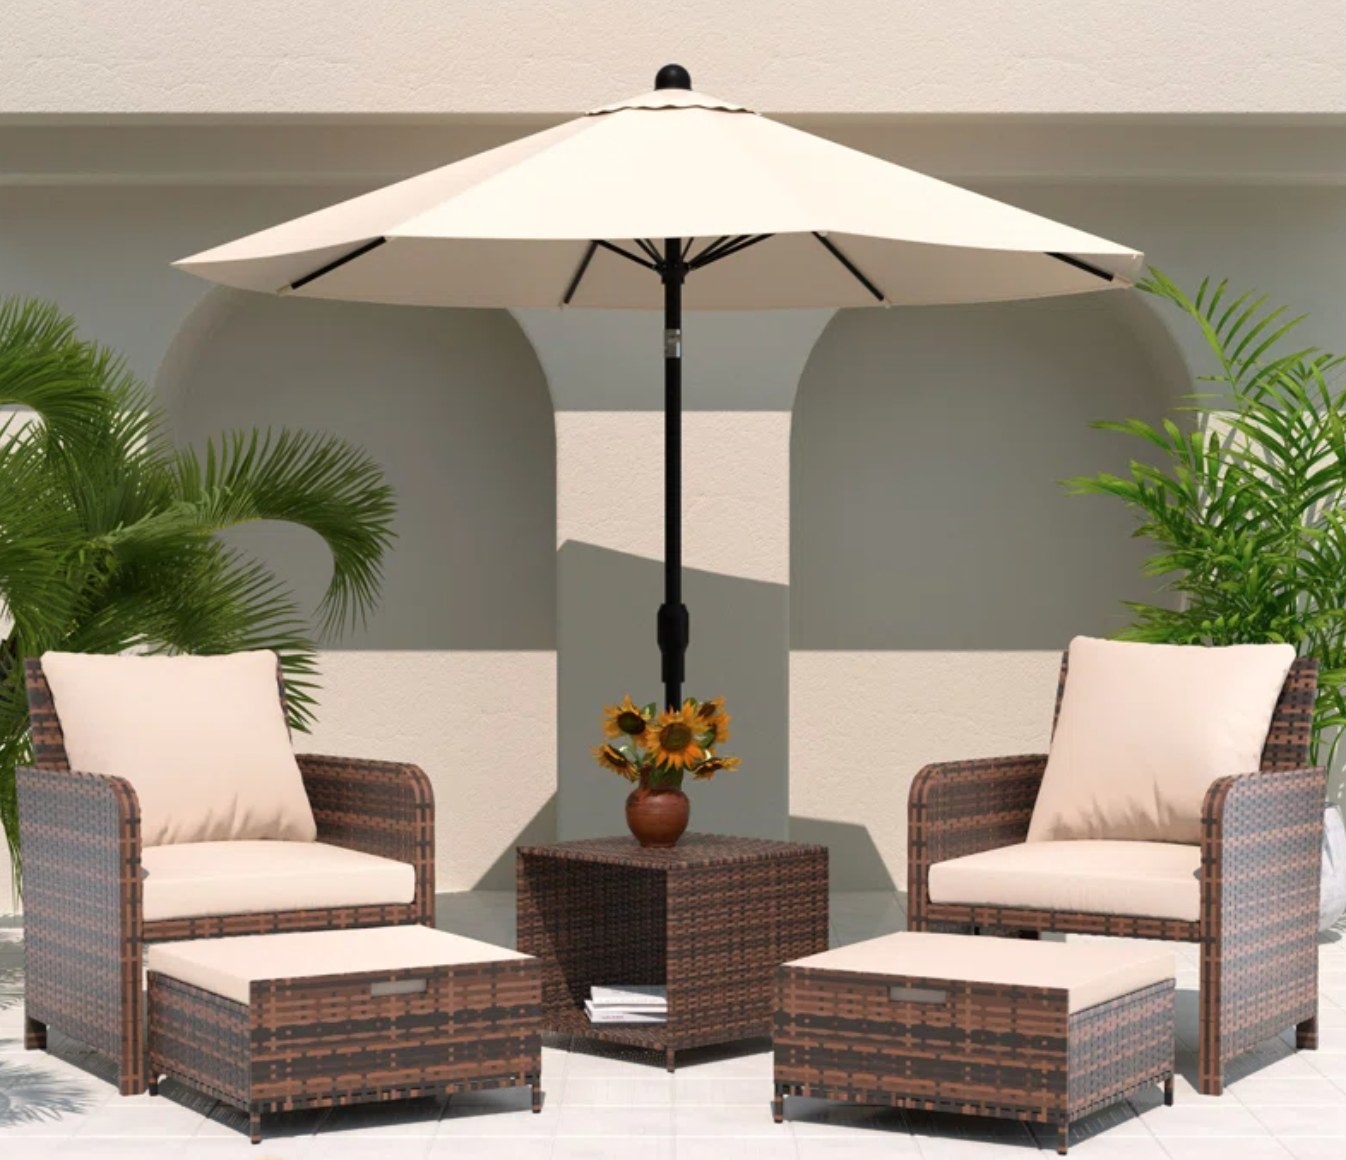 the dark wicker chairs, ottomans and side table with beige cushions on the chairs and ottomans. The set is on a patio with a large umbrella